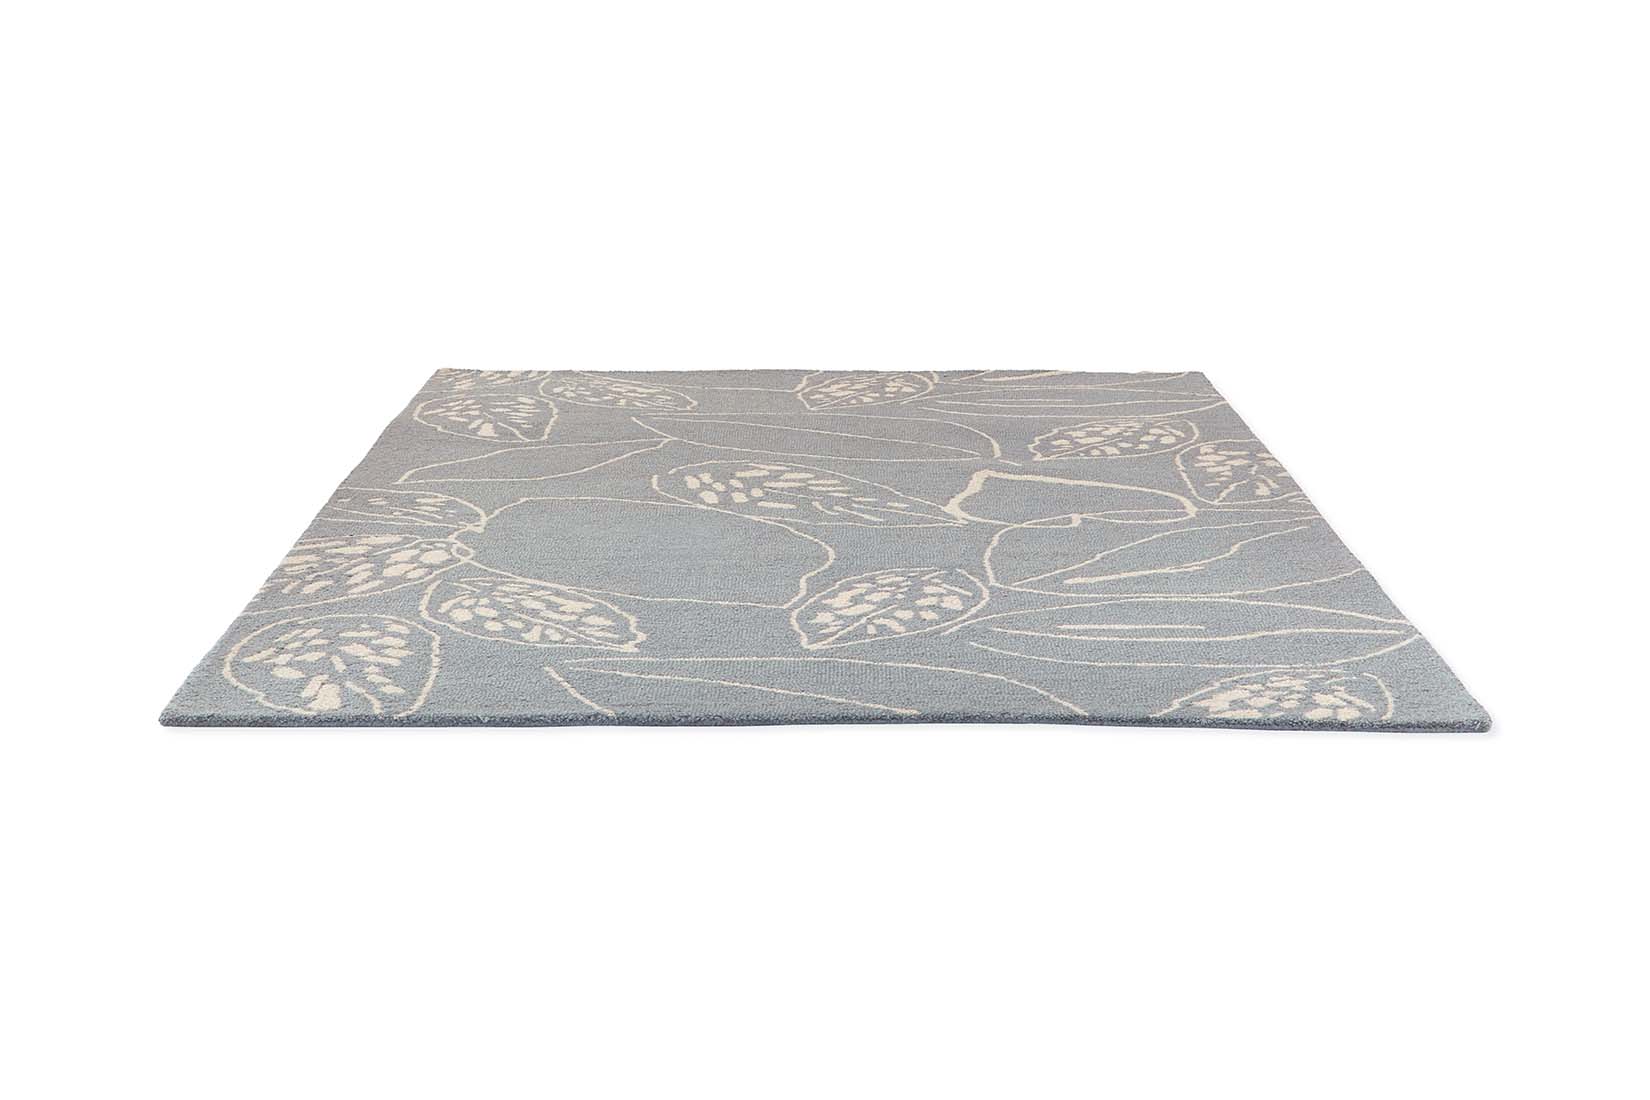 grey rug with floral pattern
